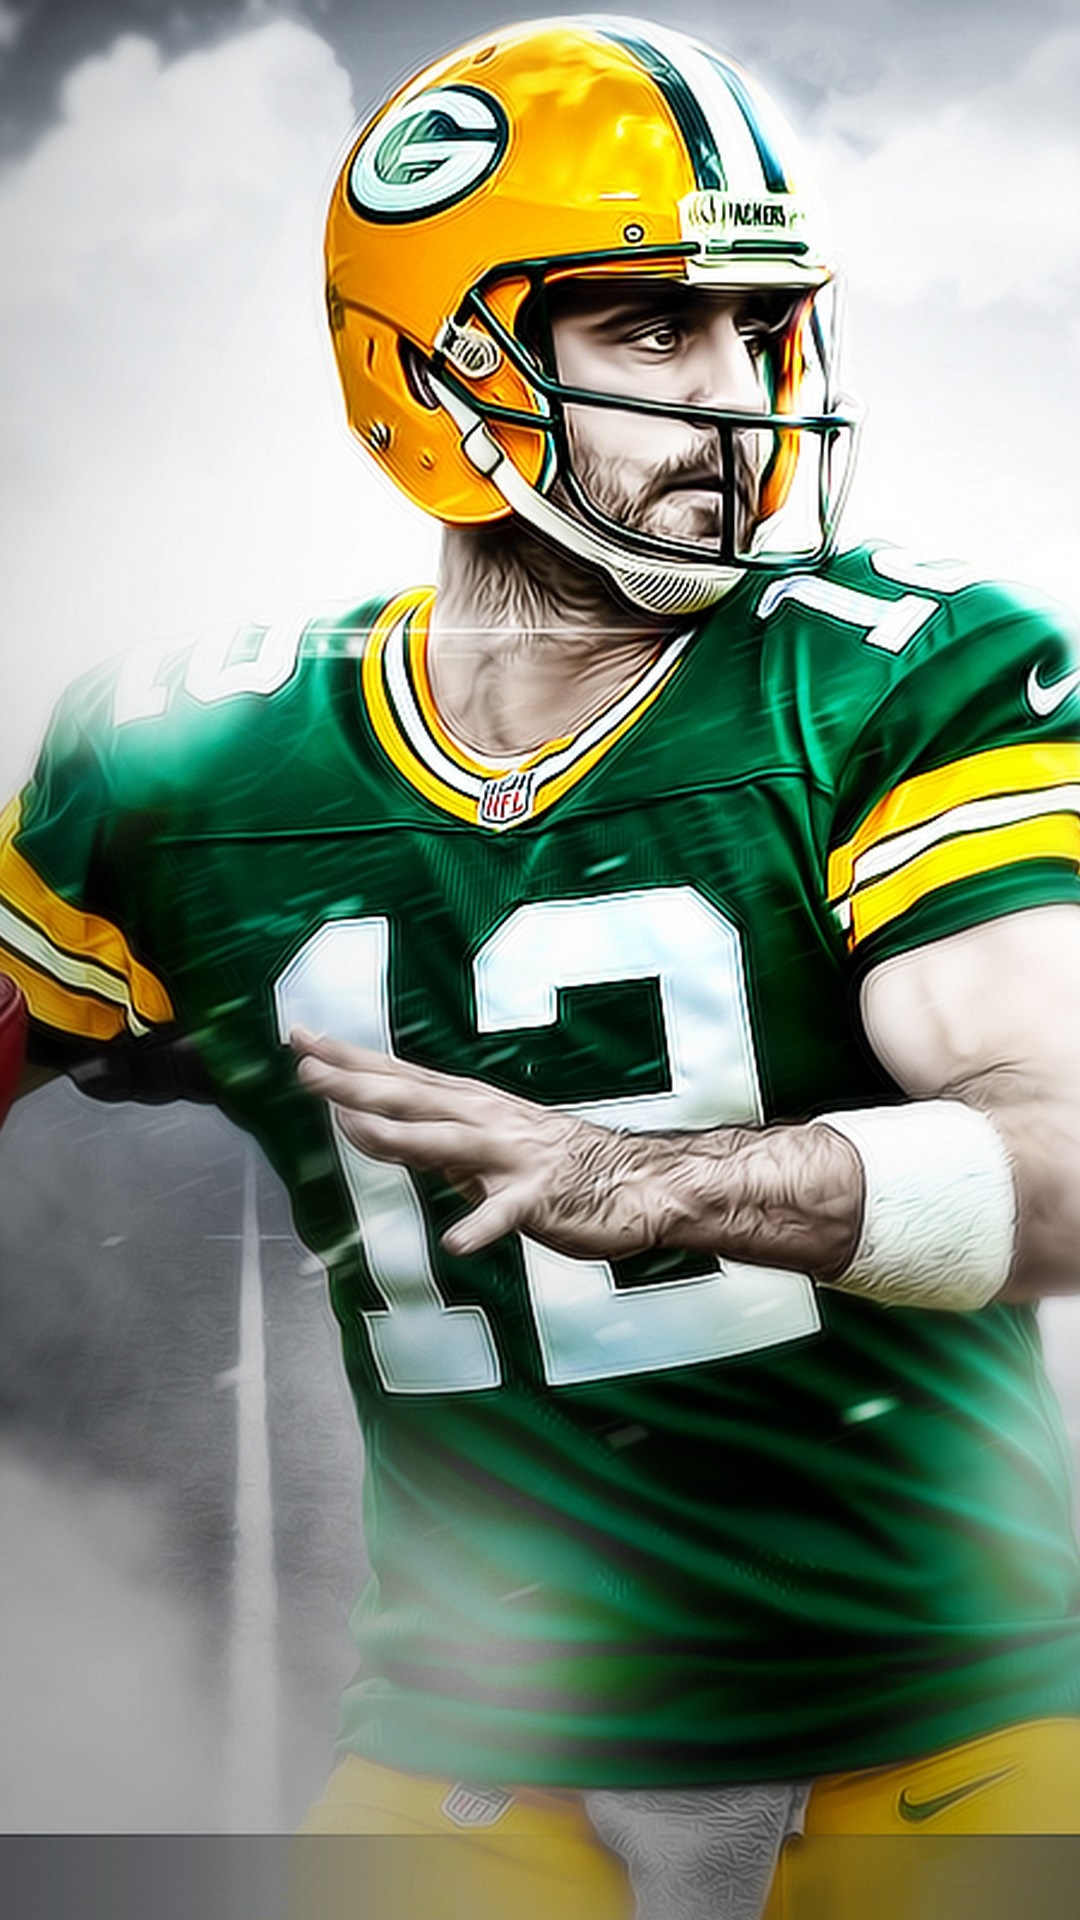 Aaron Rodgers iPhone X Wallpaper with high-resolution 1080x1920 pixel. Download and set as wallpaper for Apple iPhone X, XS Max, XR, 8, 7, 6, SE, iPad, Android